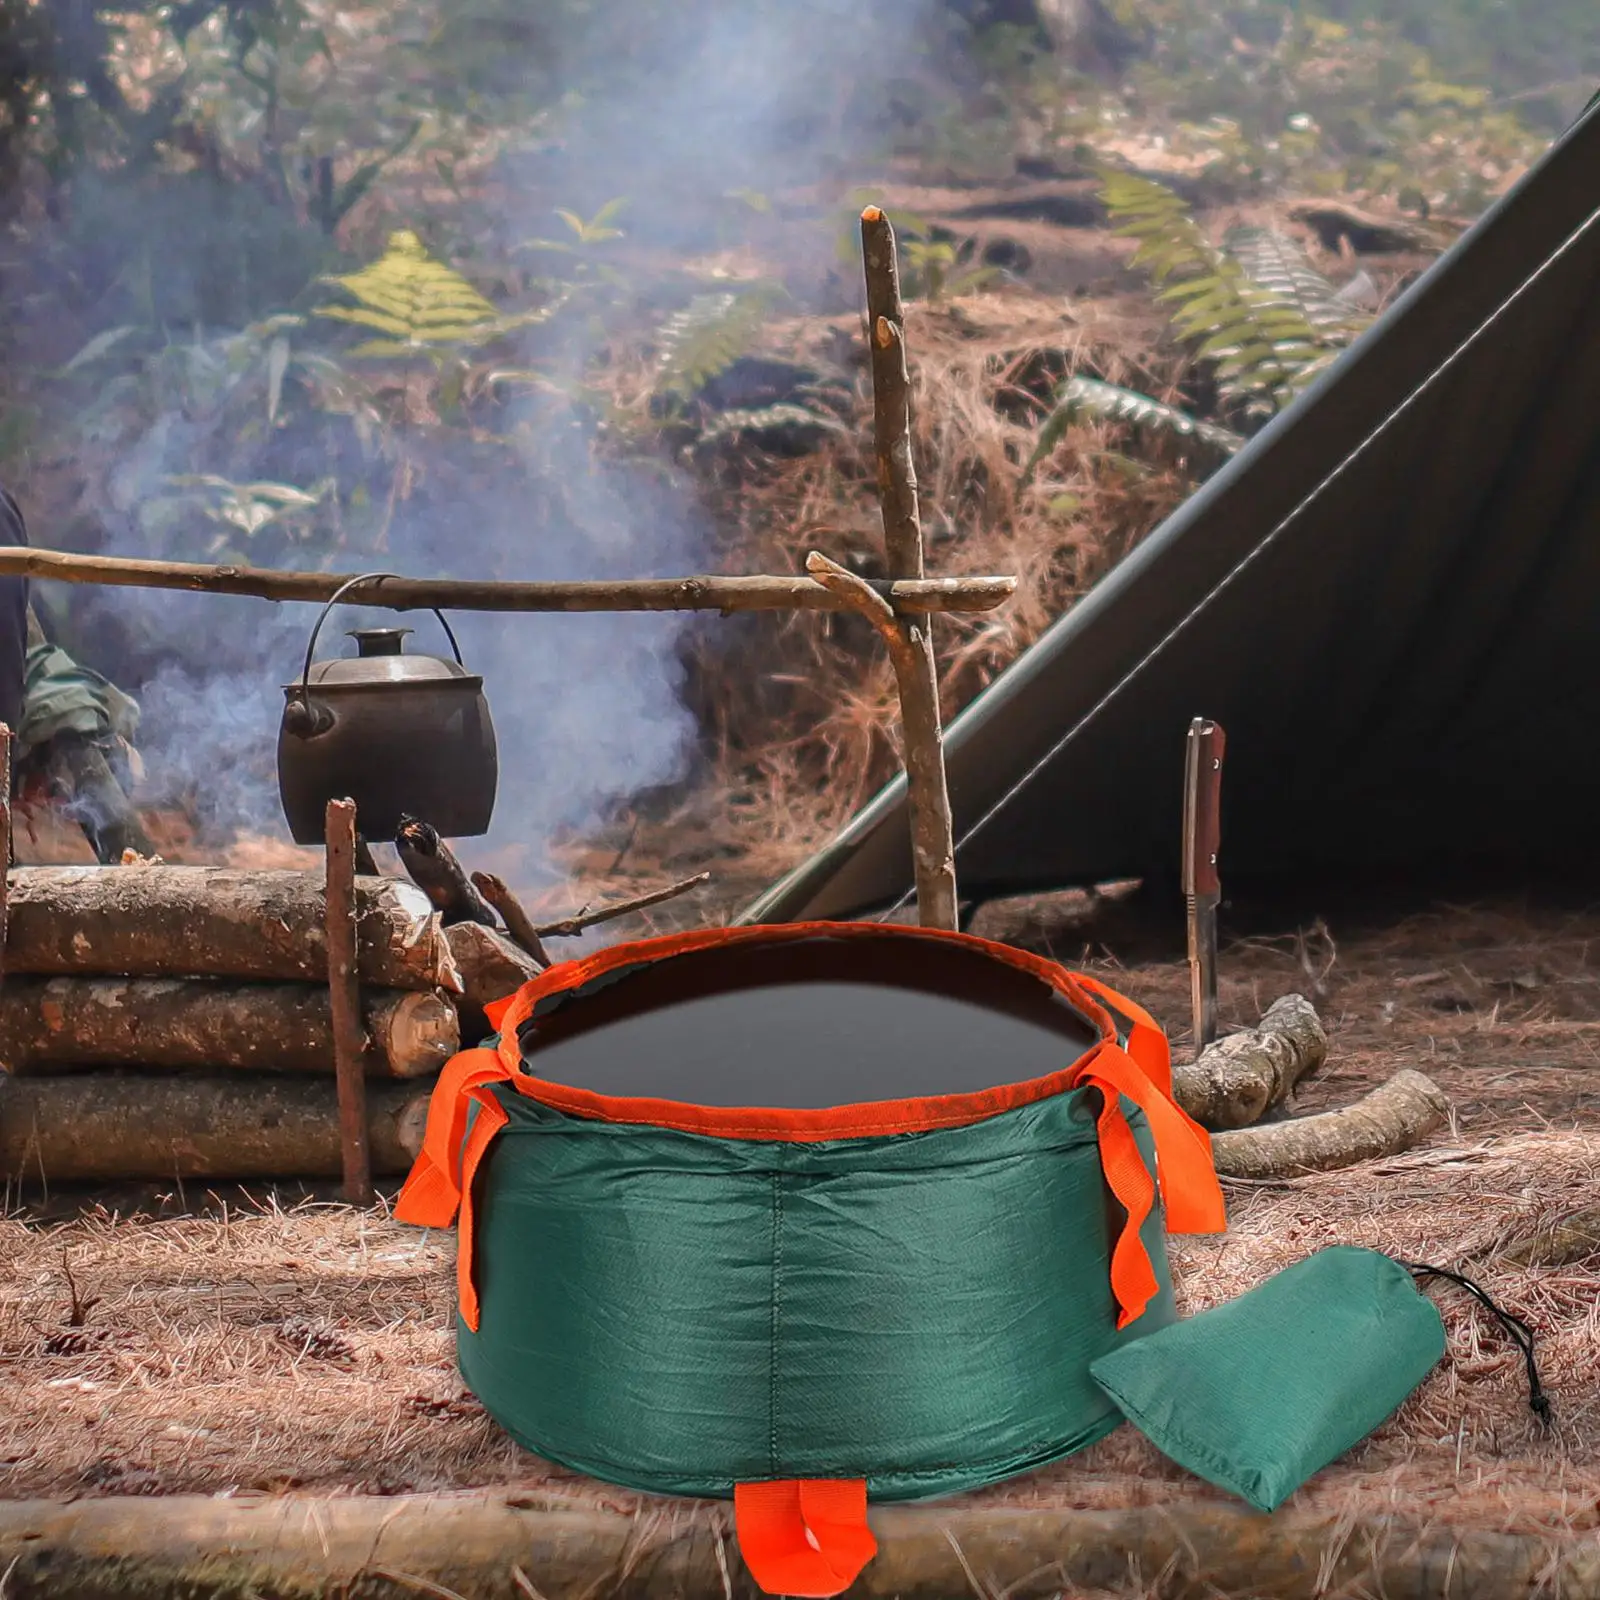 Multifunctional Collapsible Water Bucket with Storage Basin Lightweight Water Container for Camping Outdoor Washing Hiking